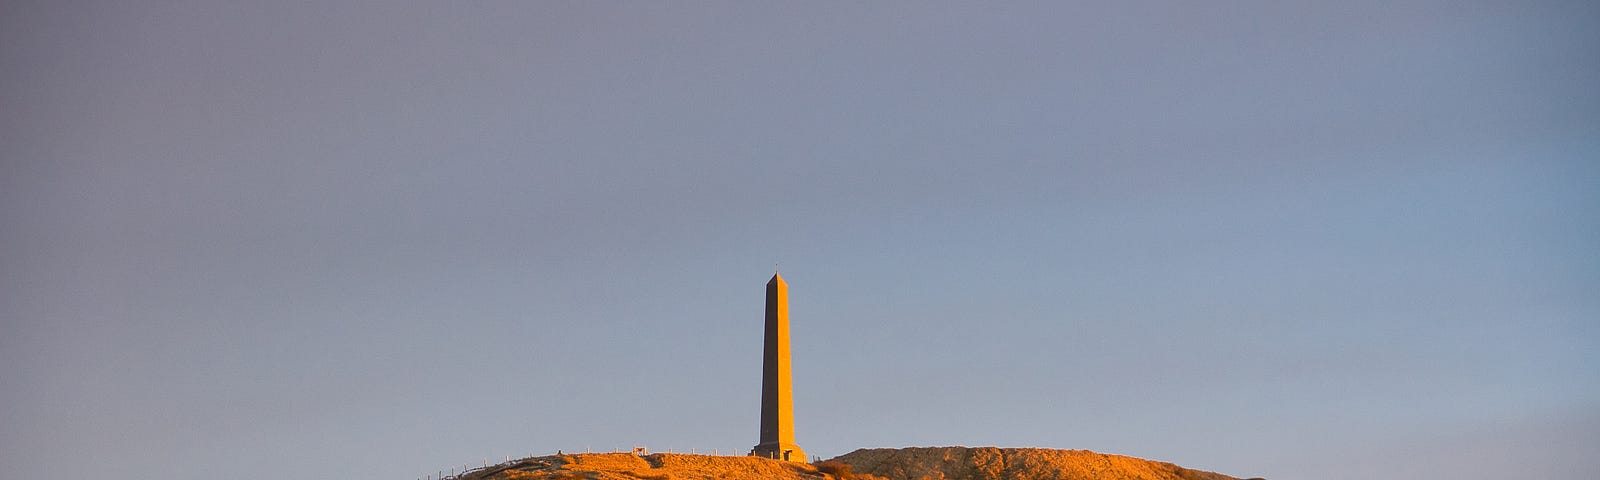 A monolith on a hill